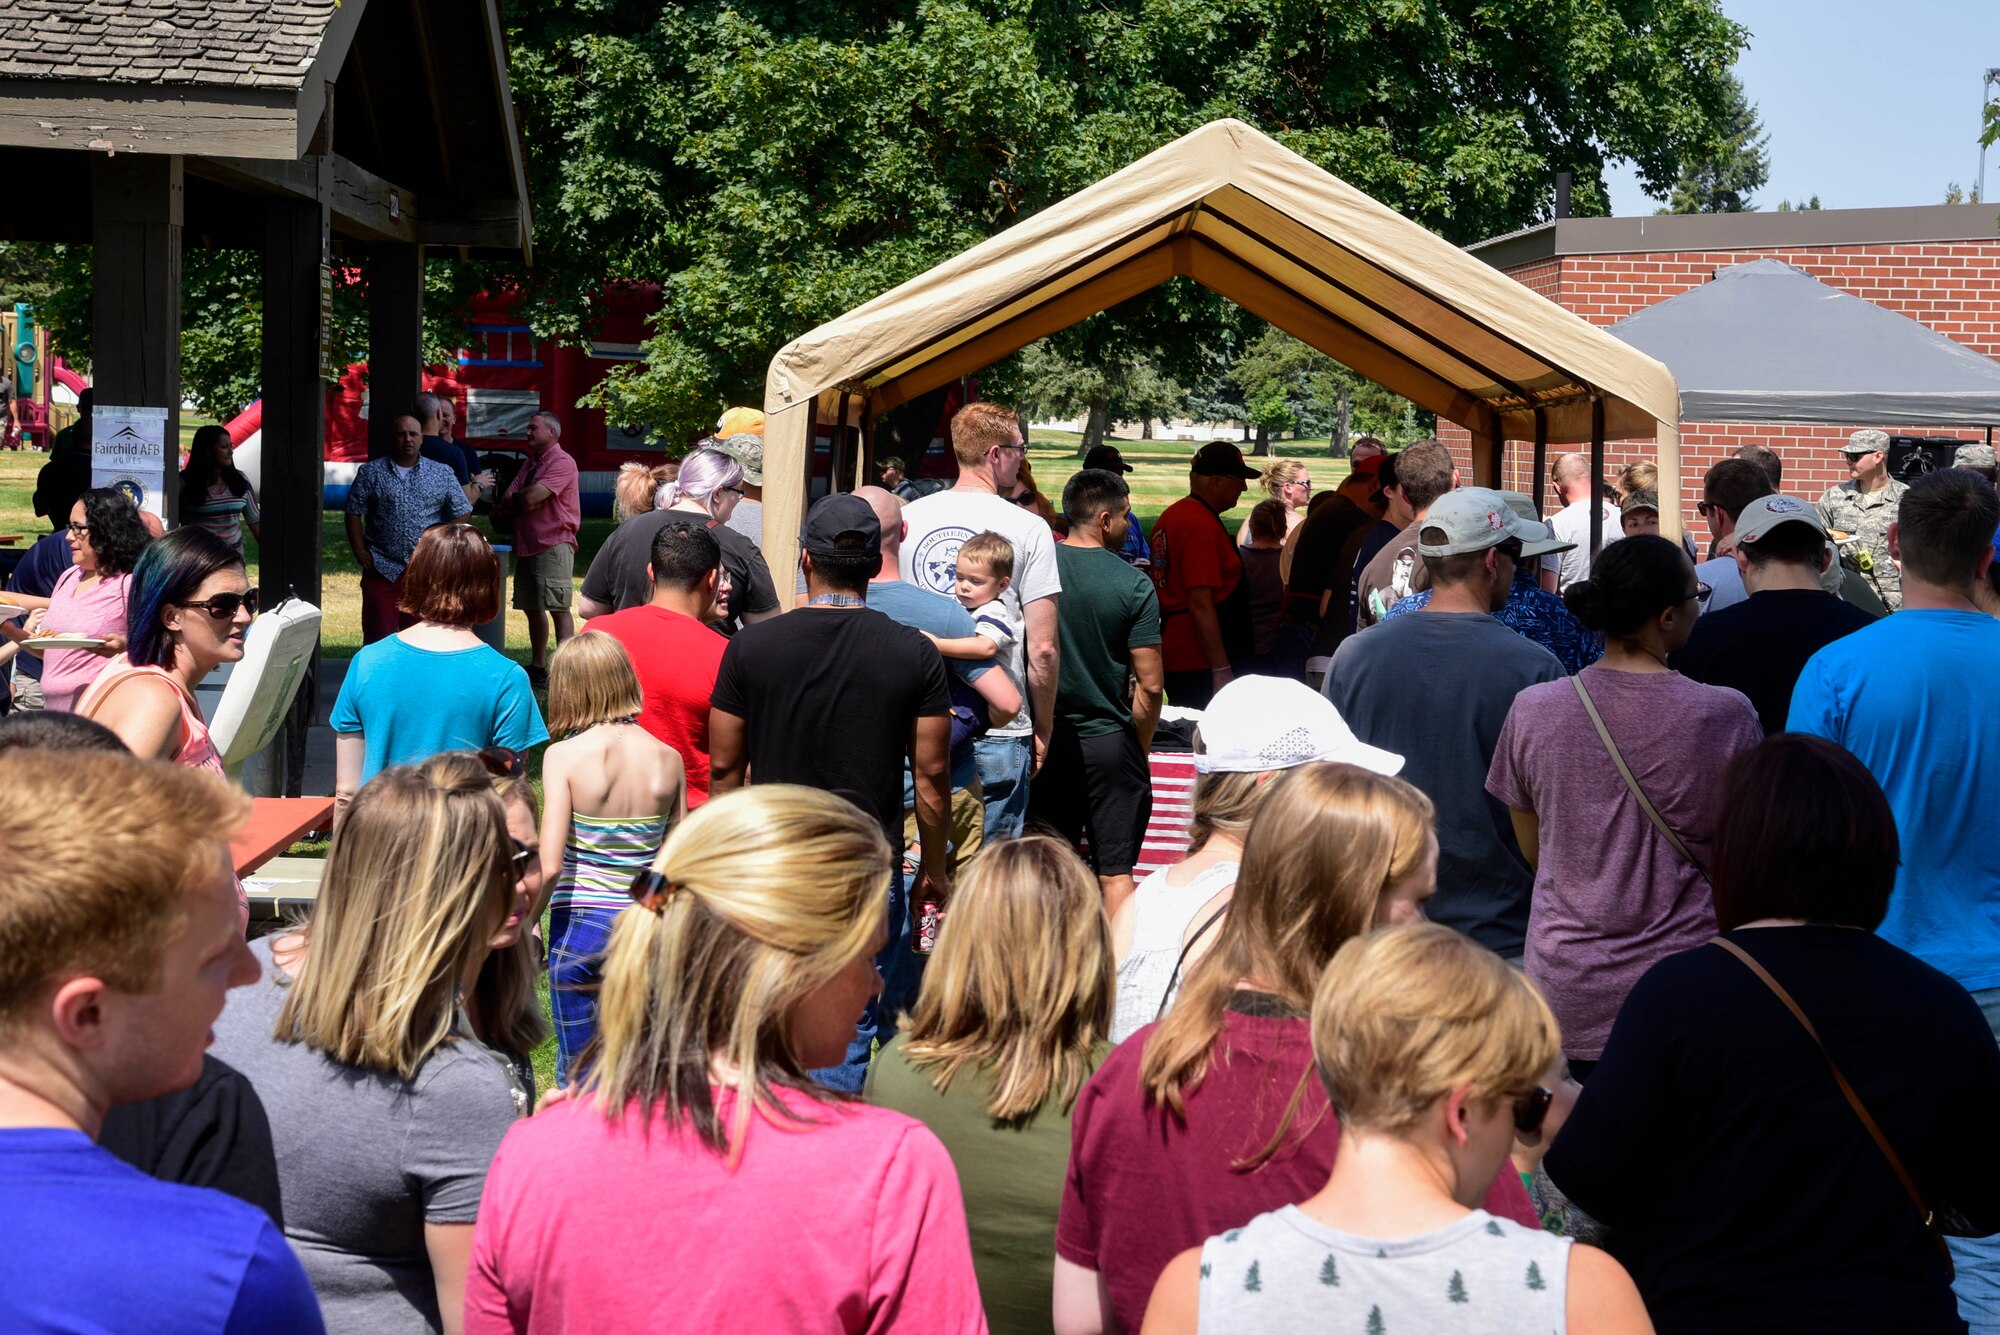 Team Fairchild Airmen line up to receive free barbeque July 28, 2018 at Fairchild Air Force Base, Washington. More than 200 Airmen and their families attended the free-food event that included a corn-hole tournament, kid’s games, water-balloon toss and a three-legged race. (U.S. Air Force photo/Staff Sgt. Nick Daniello)